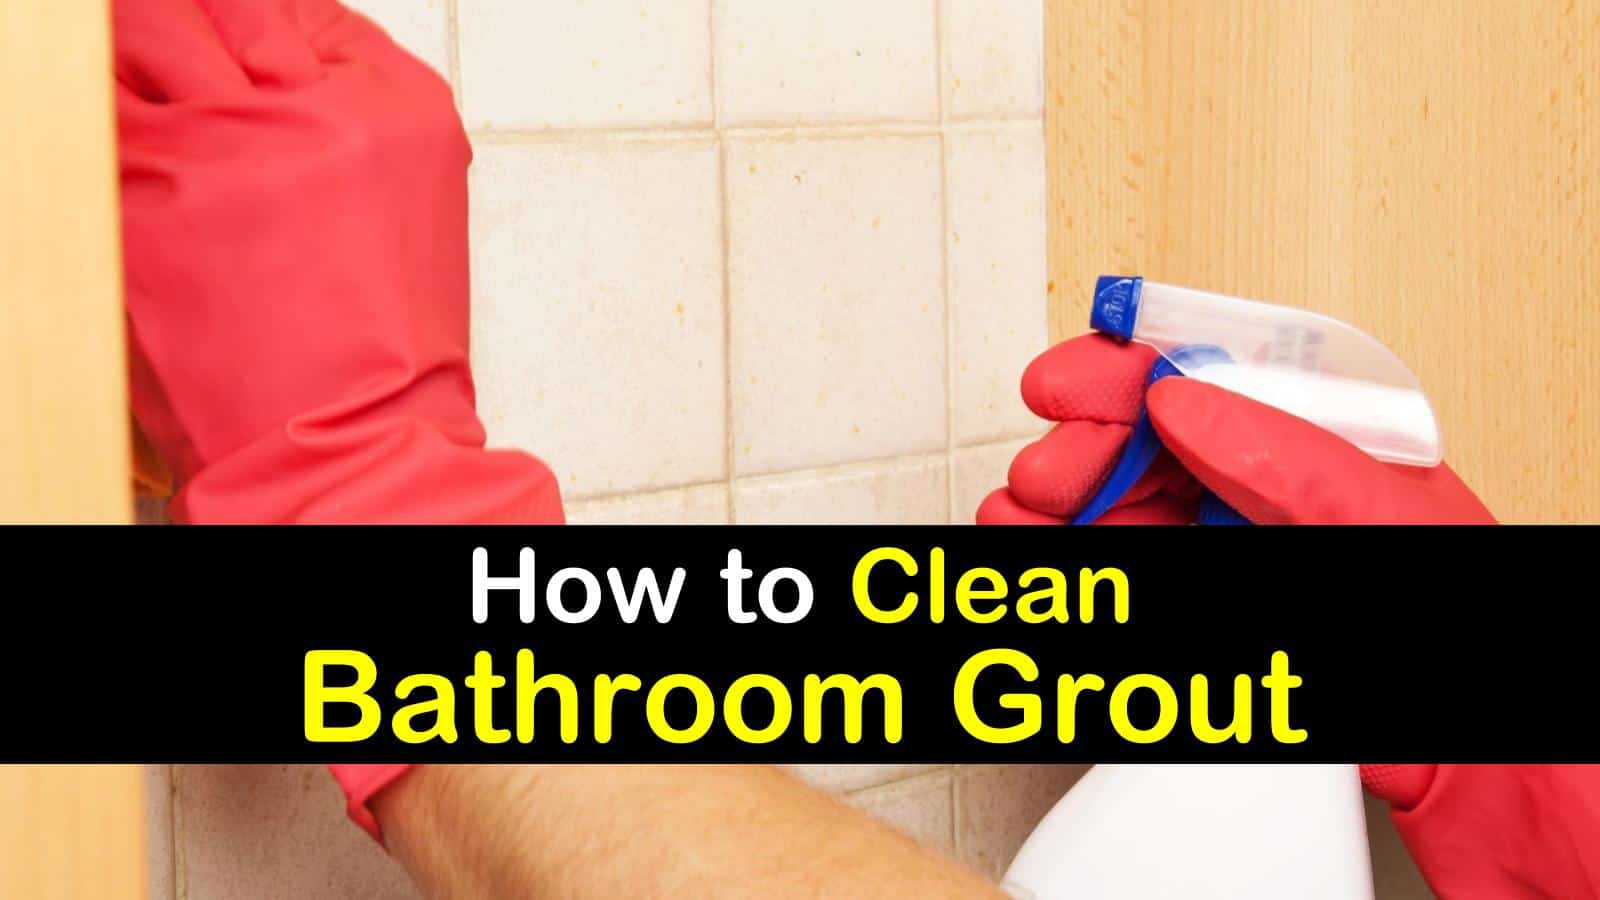 how to clean bathroom grout titleimg1